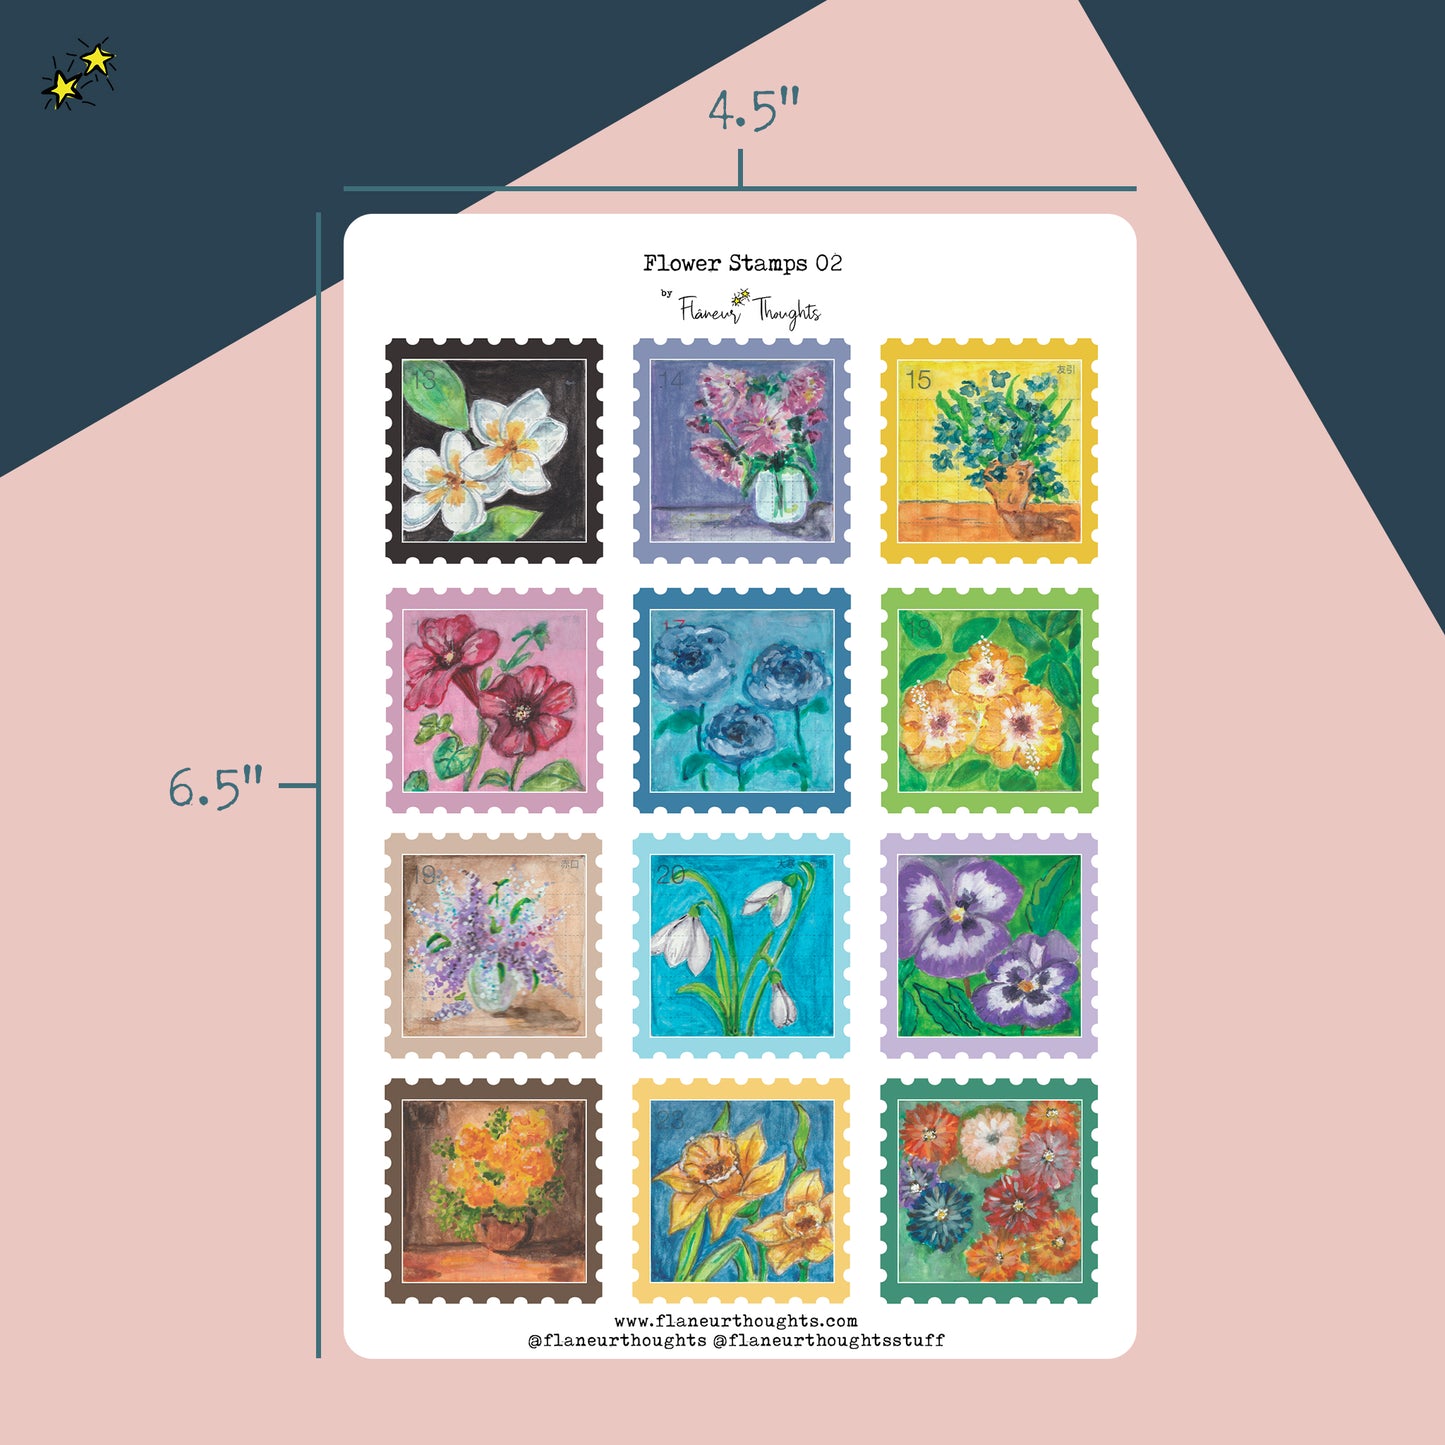 Flower Stamps 01 to 03